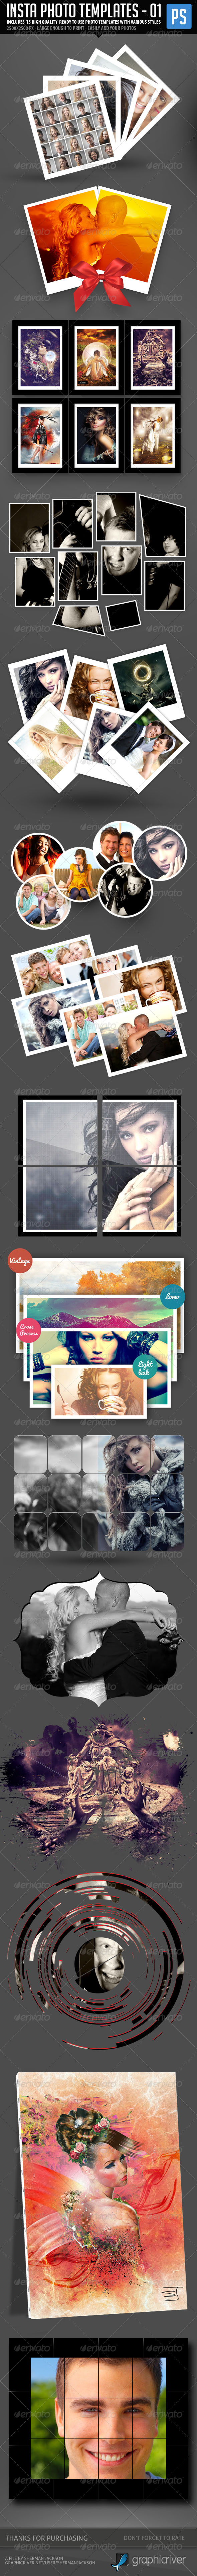 Insta Photo Templates (15 in 1) by ShermanJackson | GraphicRiver